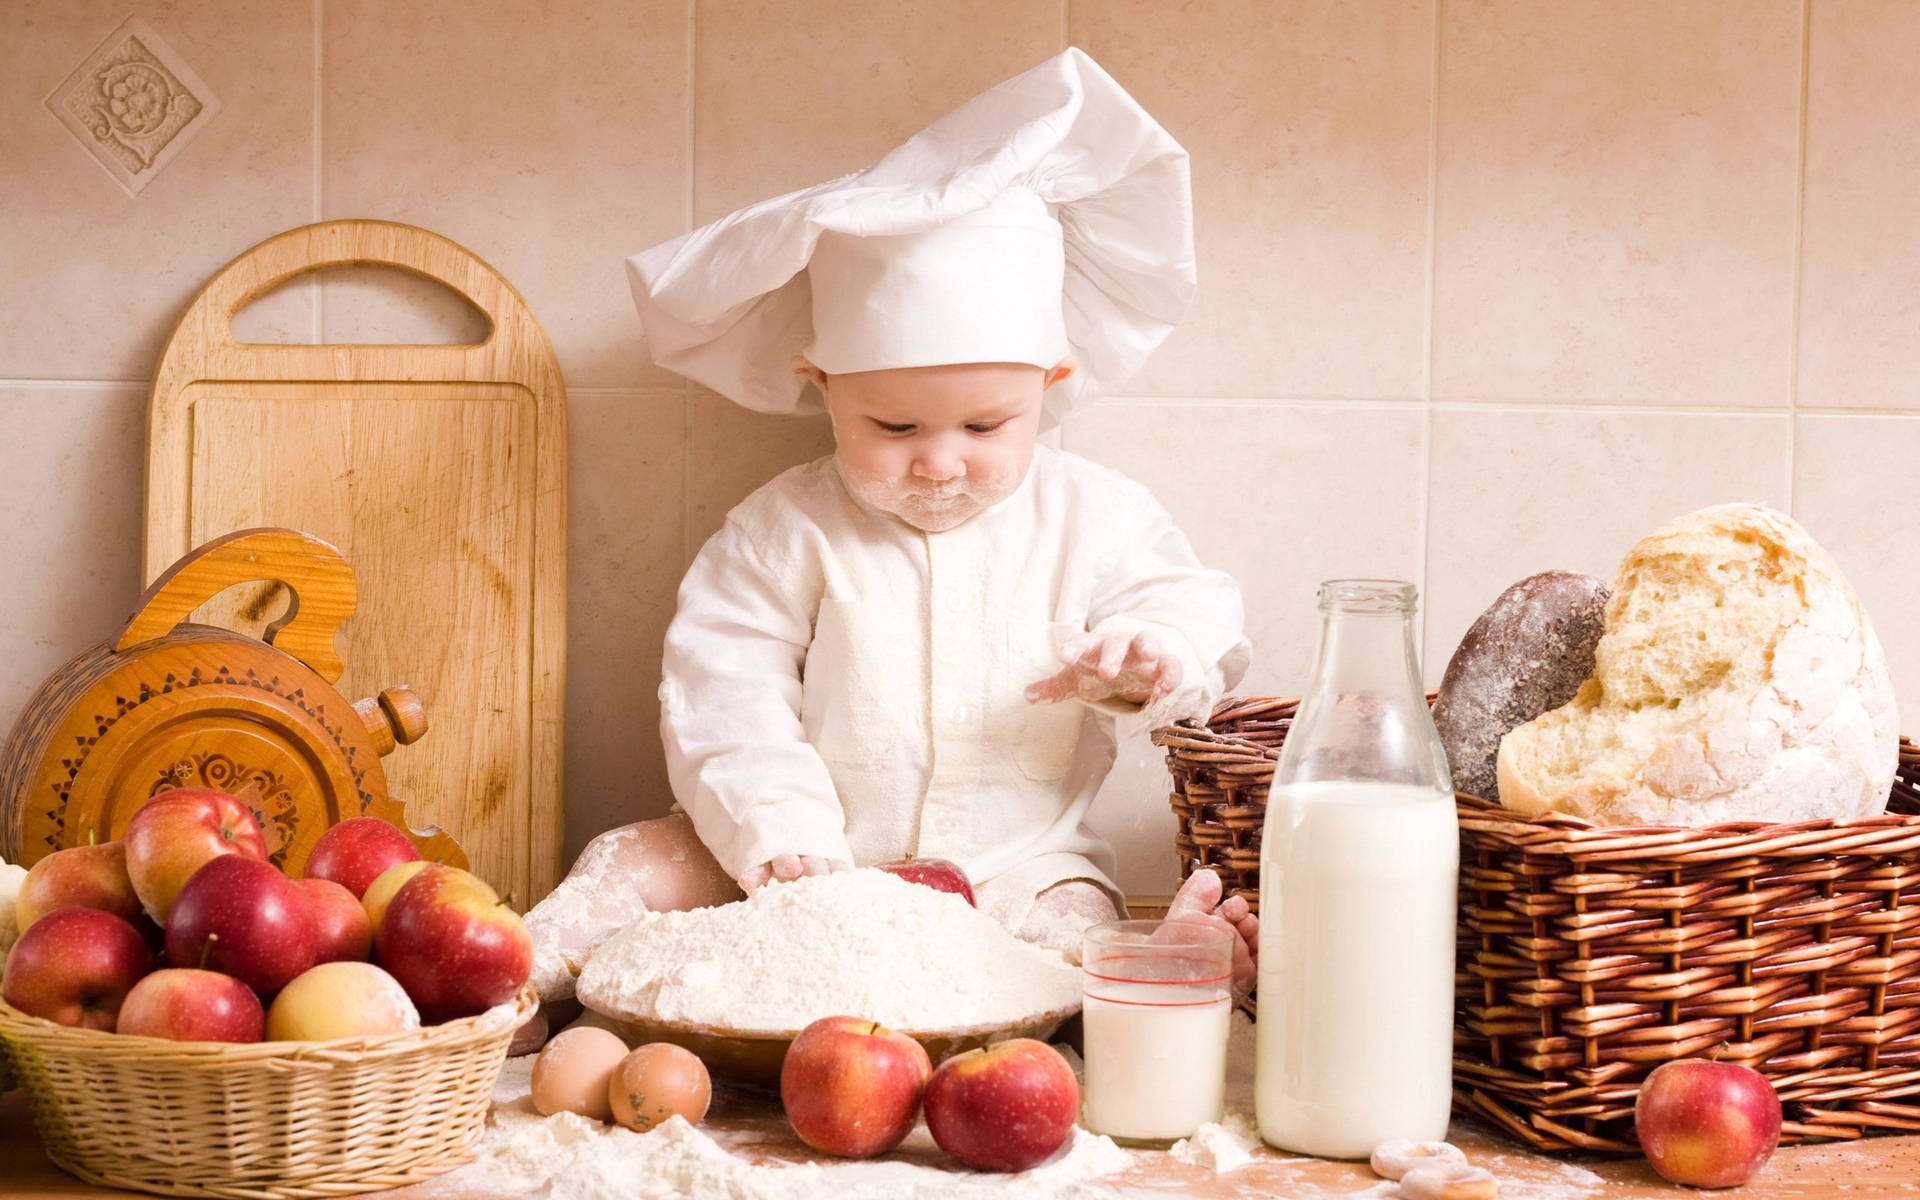 Adorable cooking baby wallpaper.